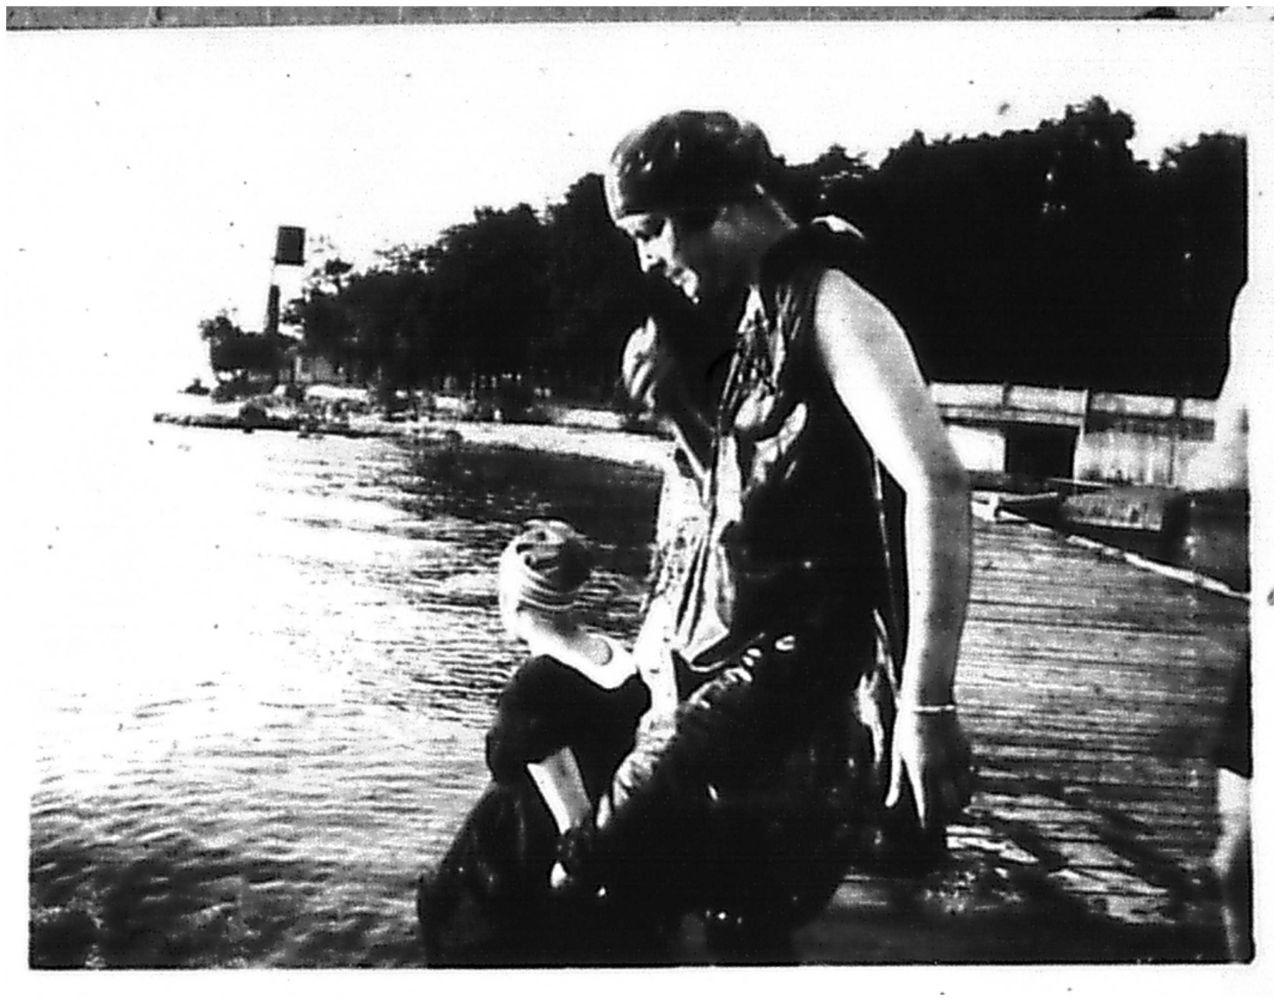 Middle Bass Club. Phyllis Kinsey on the Club dock. Circa 1920s.